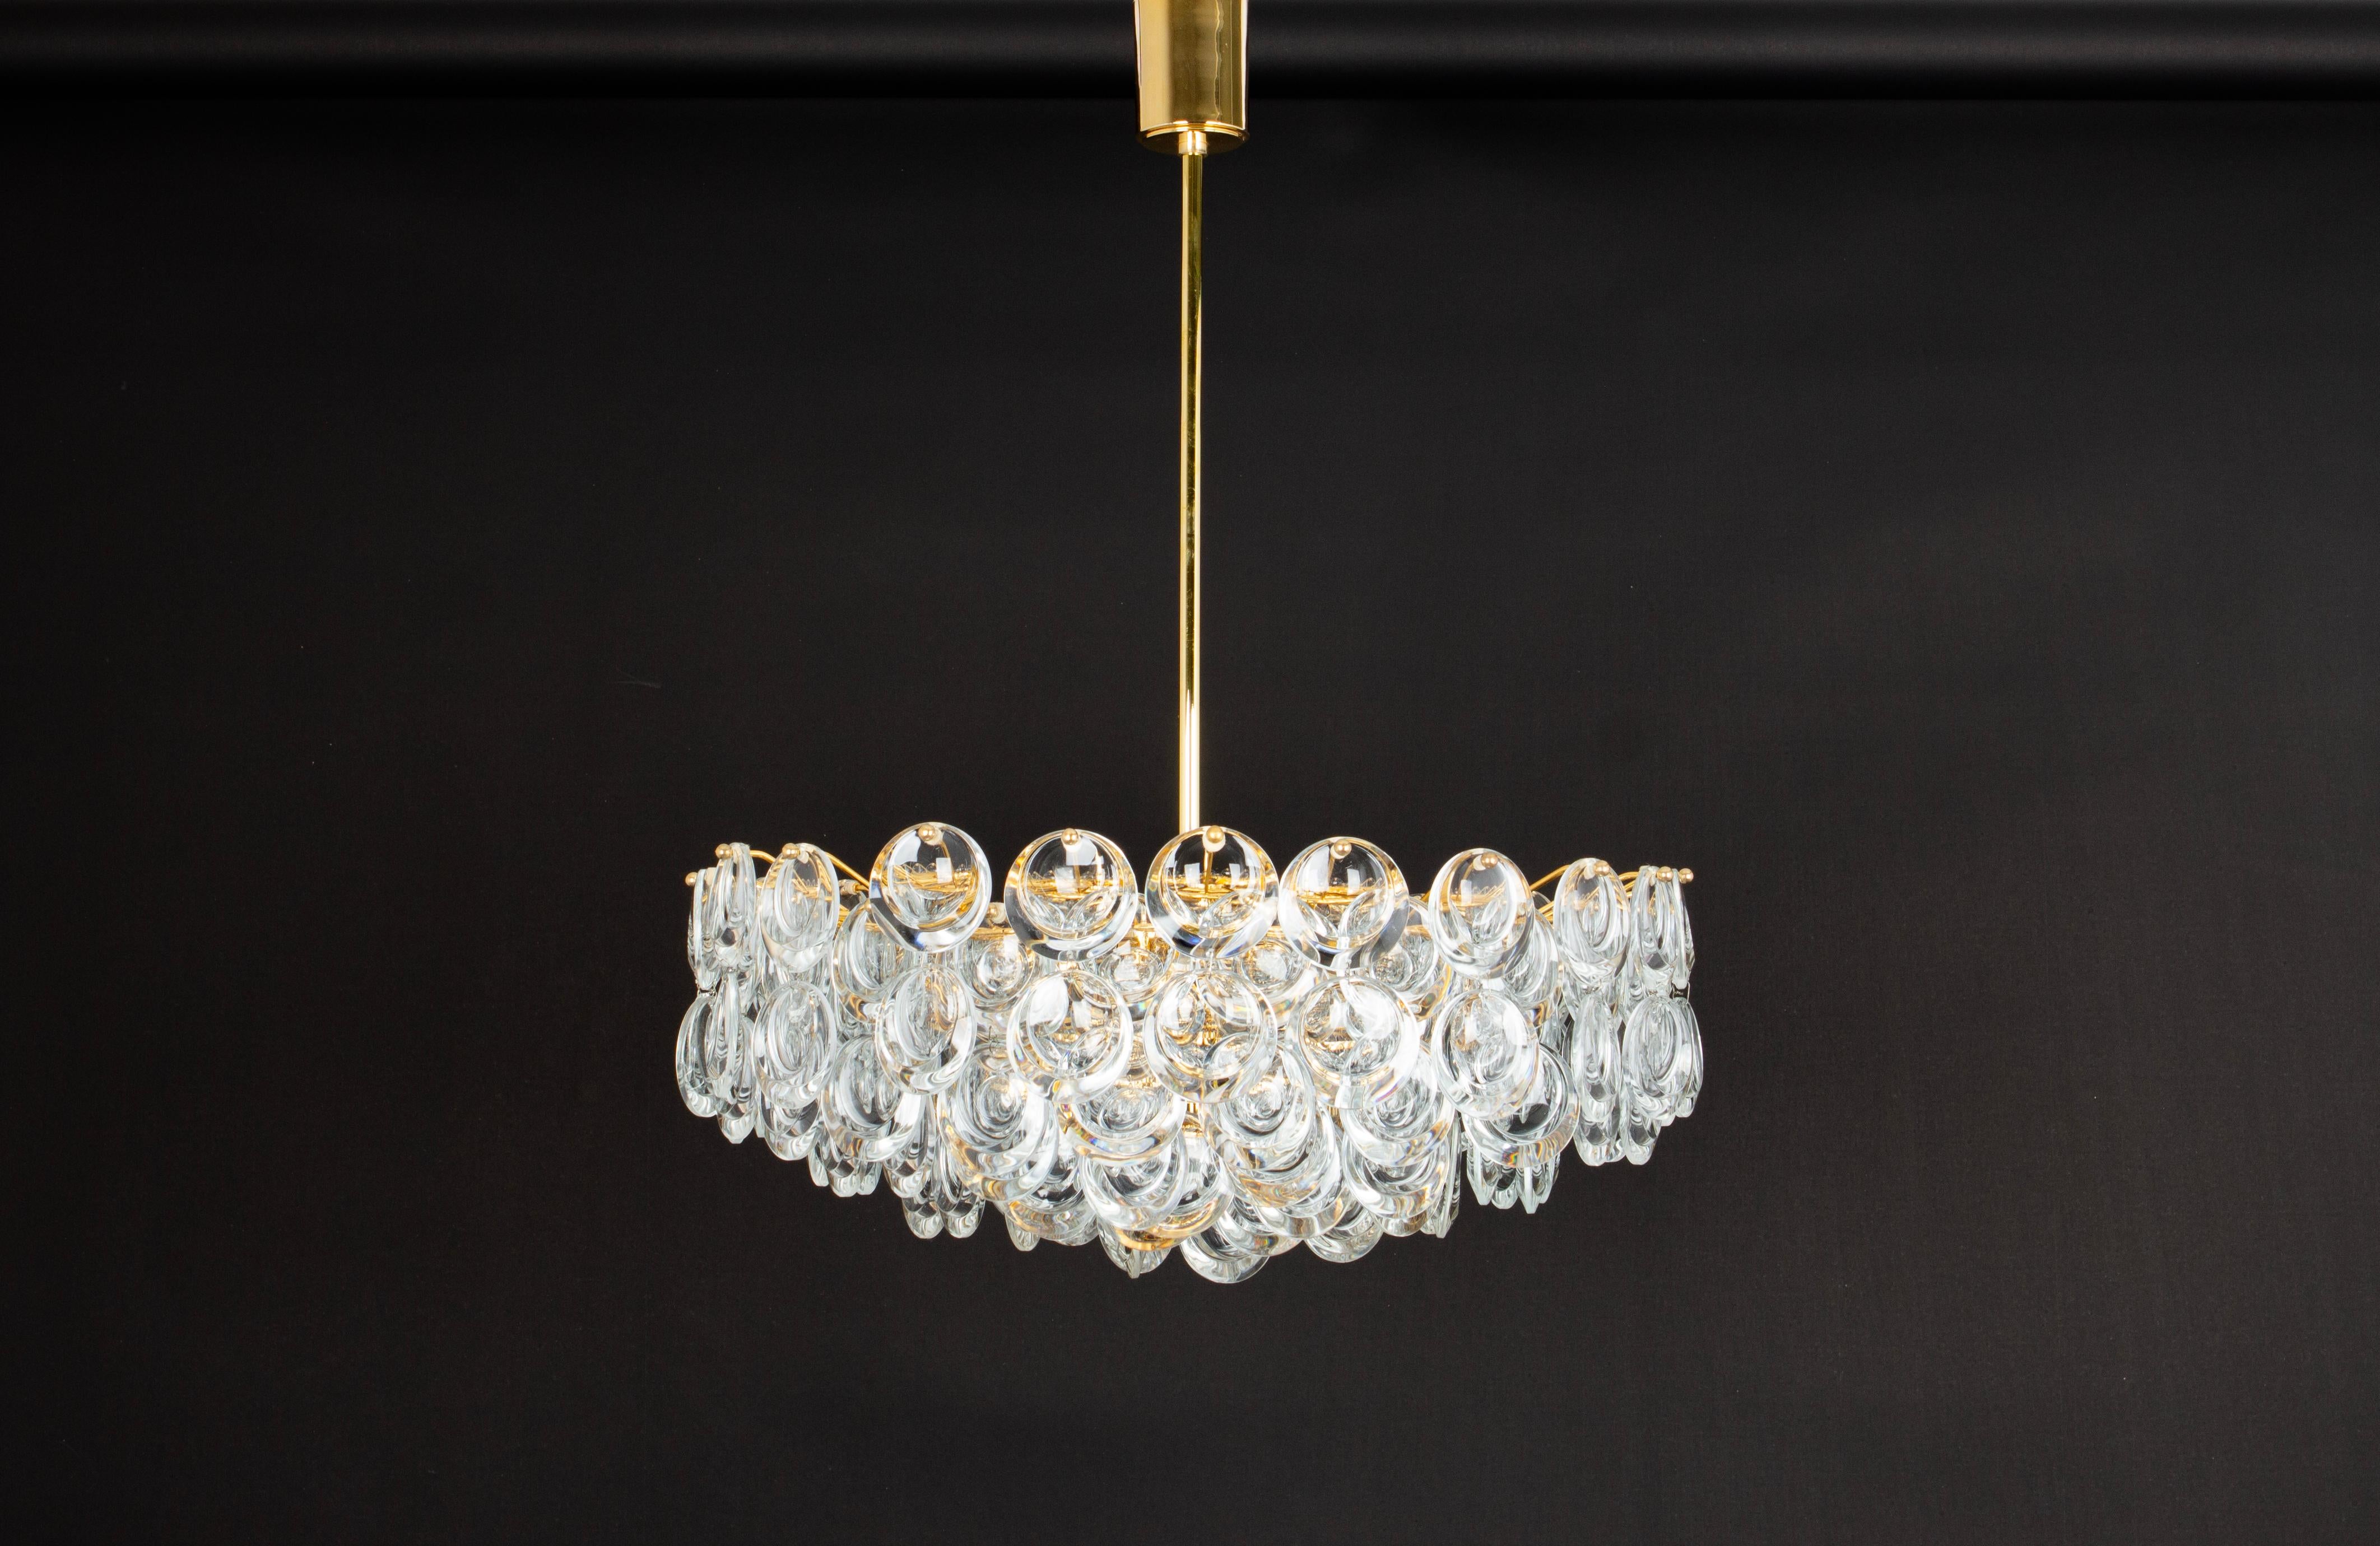 Delicate floral chandelier with crystal glass and gilded brass parts made by Palwa, Sciolari Design Germany, 1970s. Featuring a multitude of crystal glasses.
Measures: Diameter 19.8